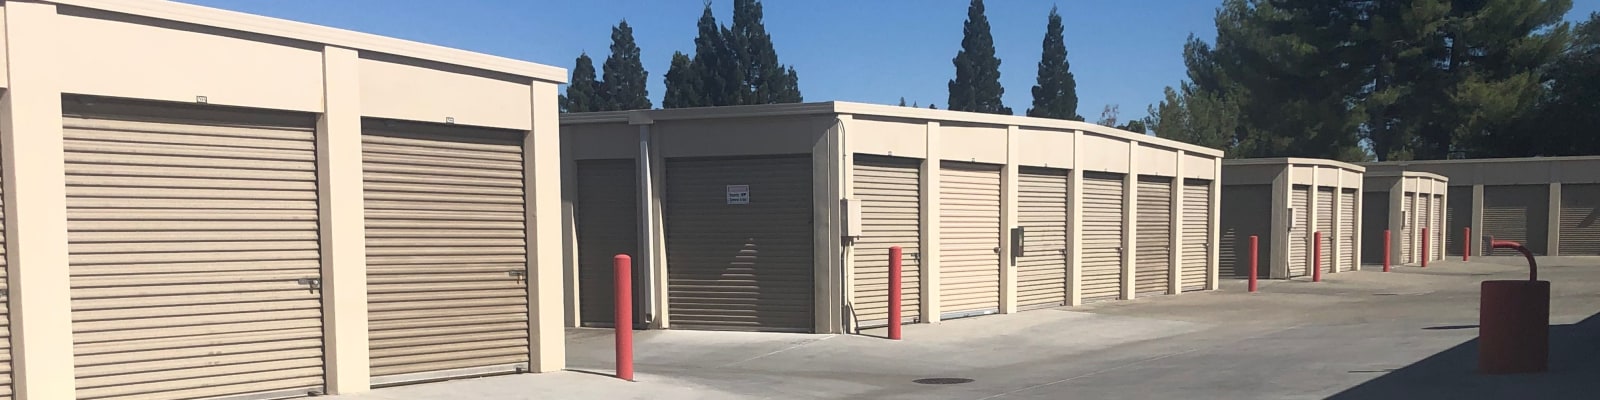 Unit sizes and prices at Gold Country Self Storage in Folsom, California